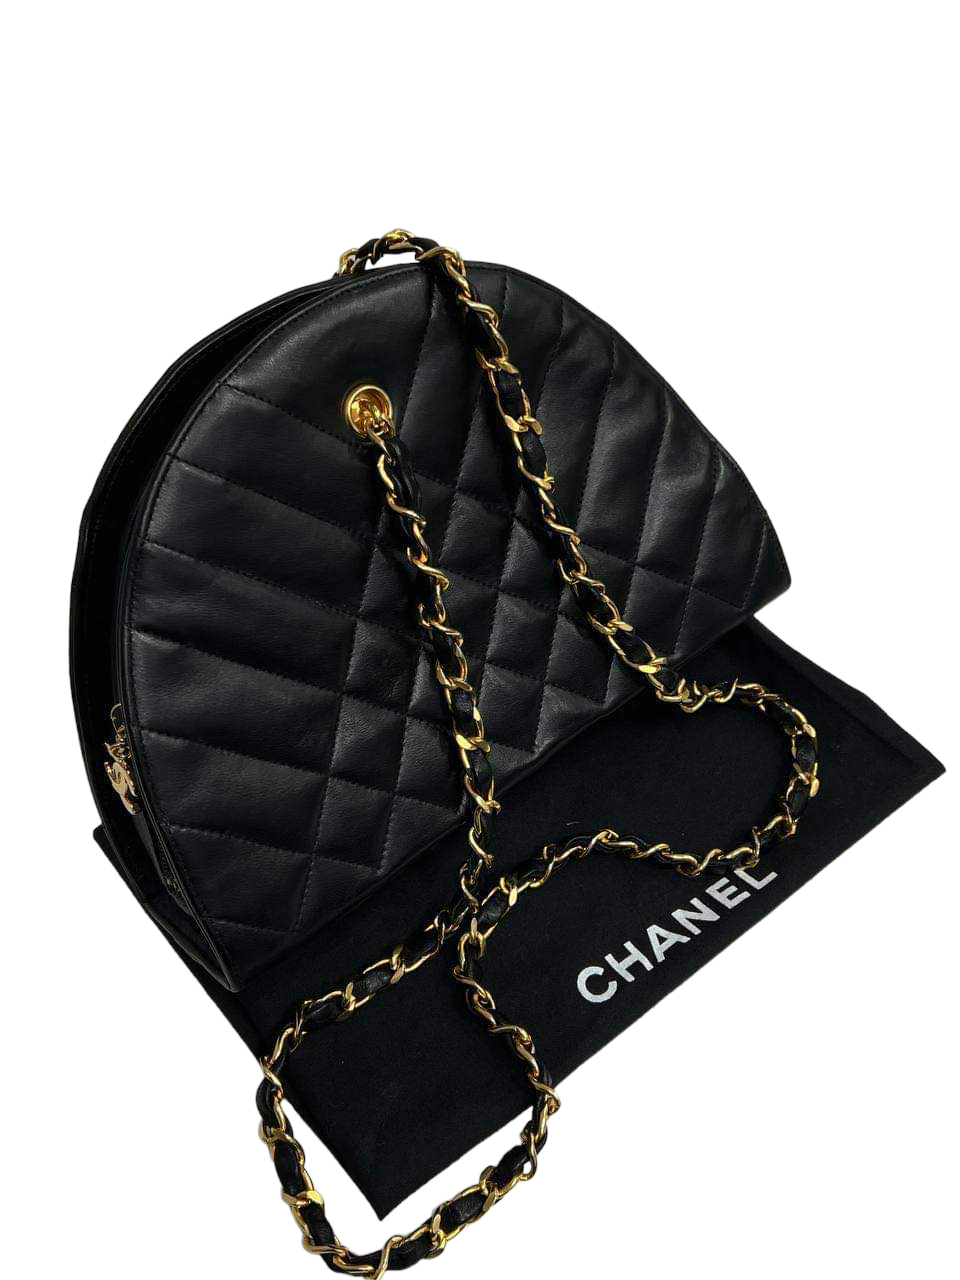 Buy Chanel CC Black Half Round Lambskin Quilted Shoulder Bag pre-owned |  SELLUXURY marketplace